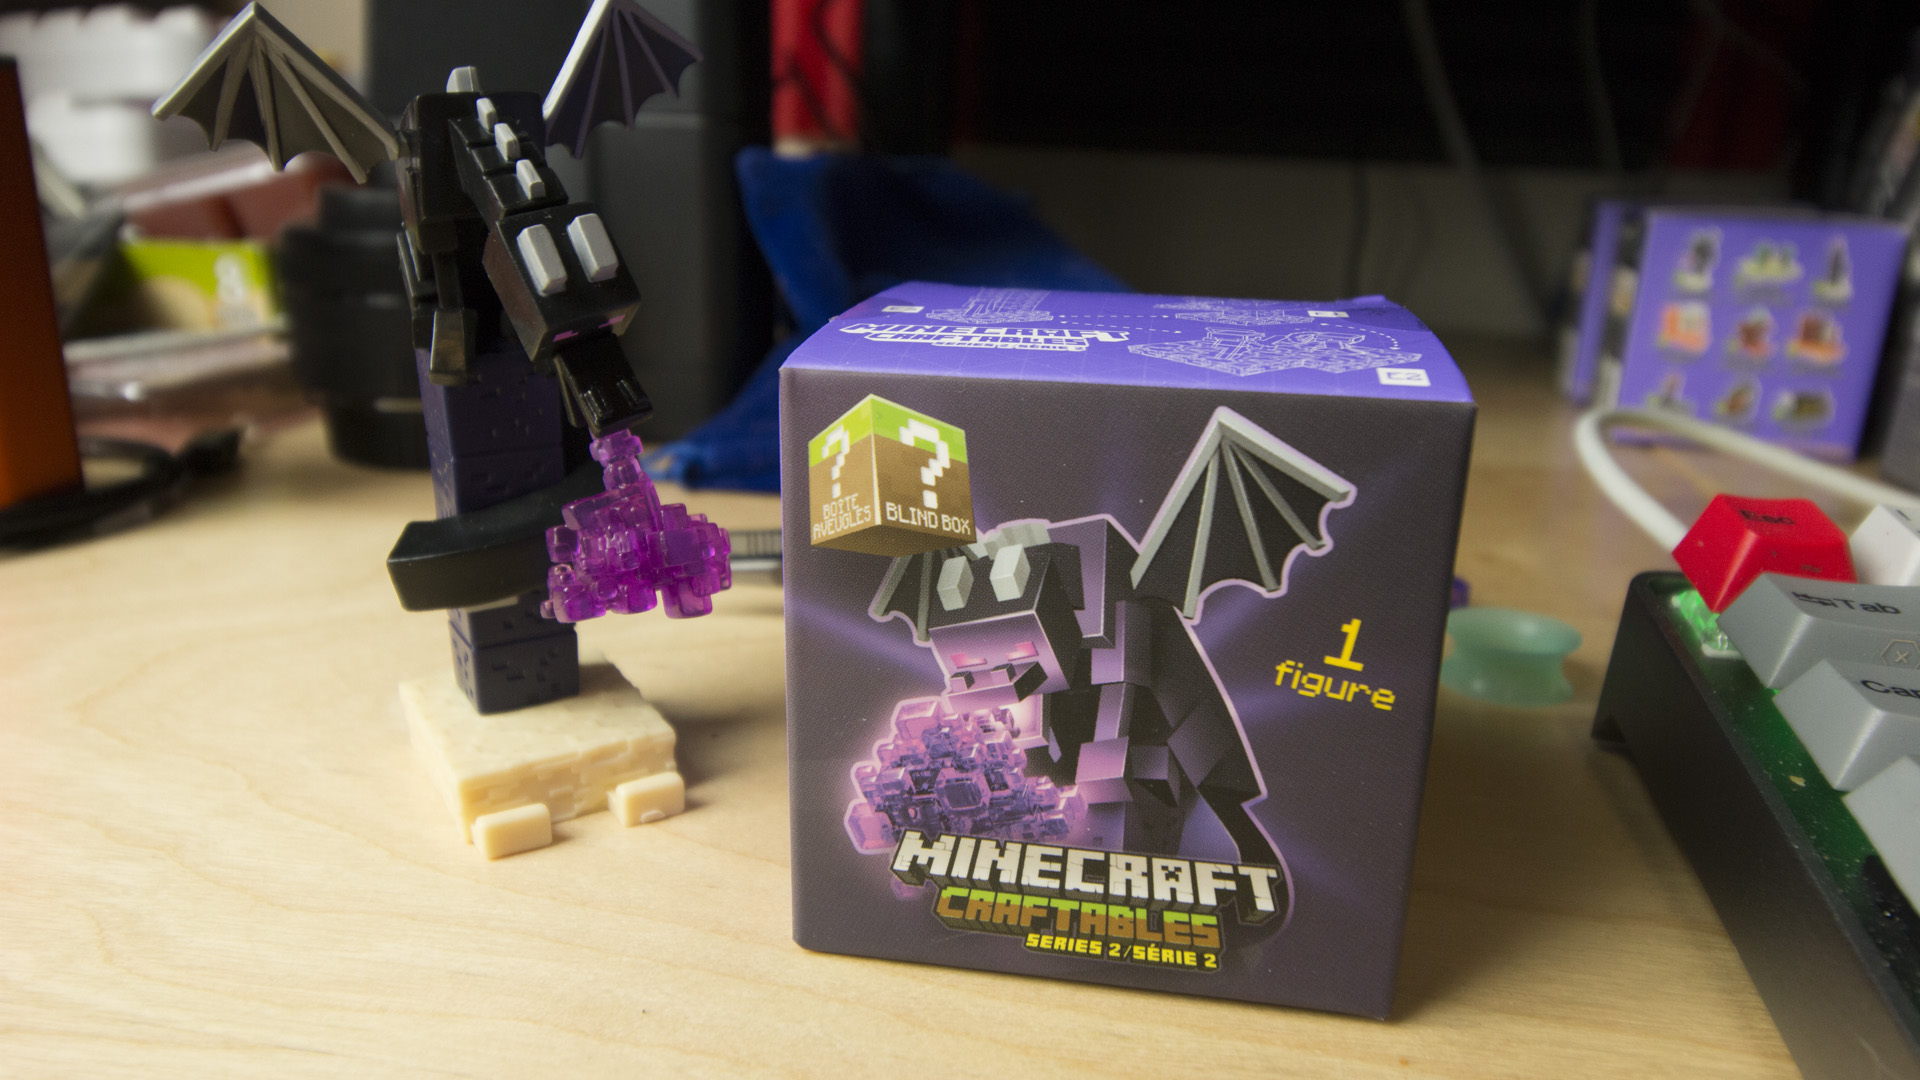 Mini Minecraft Building Sets Are Just Darling